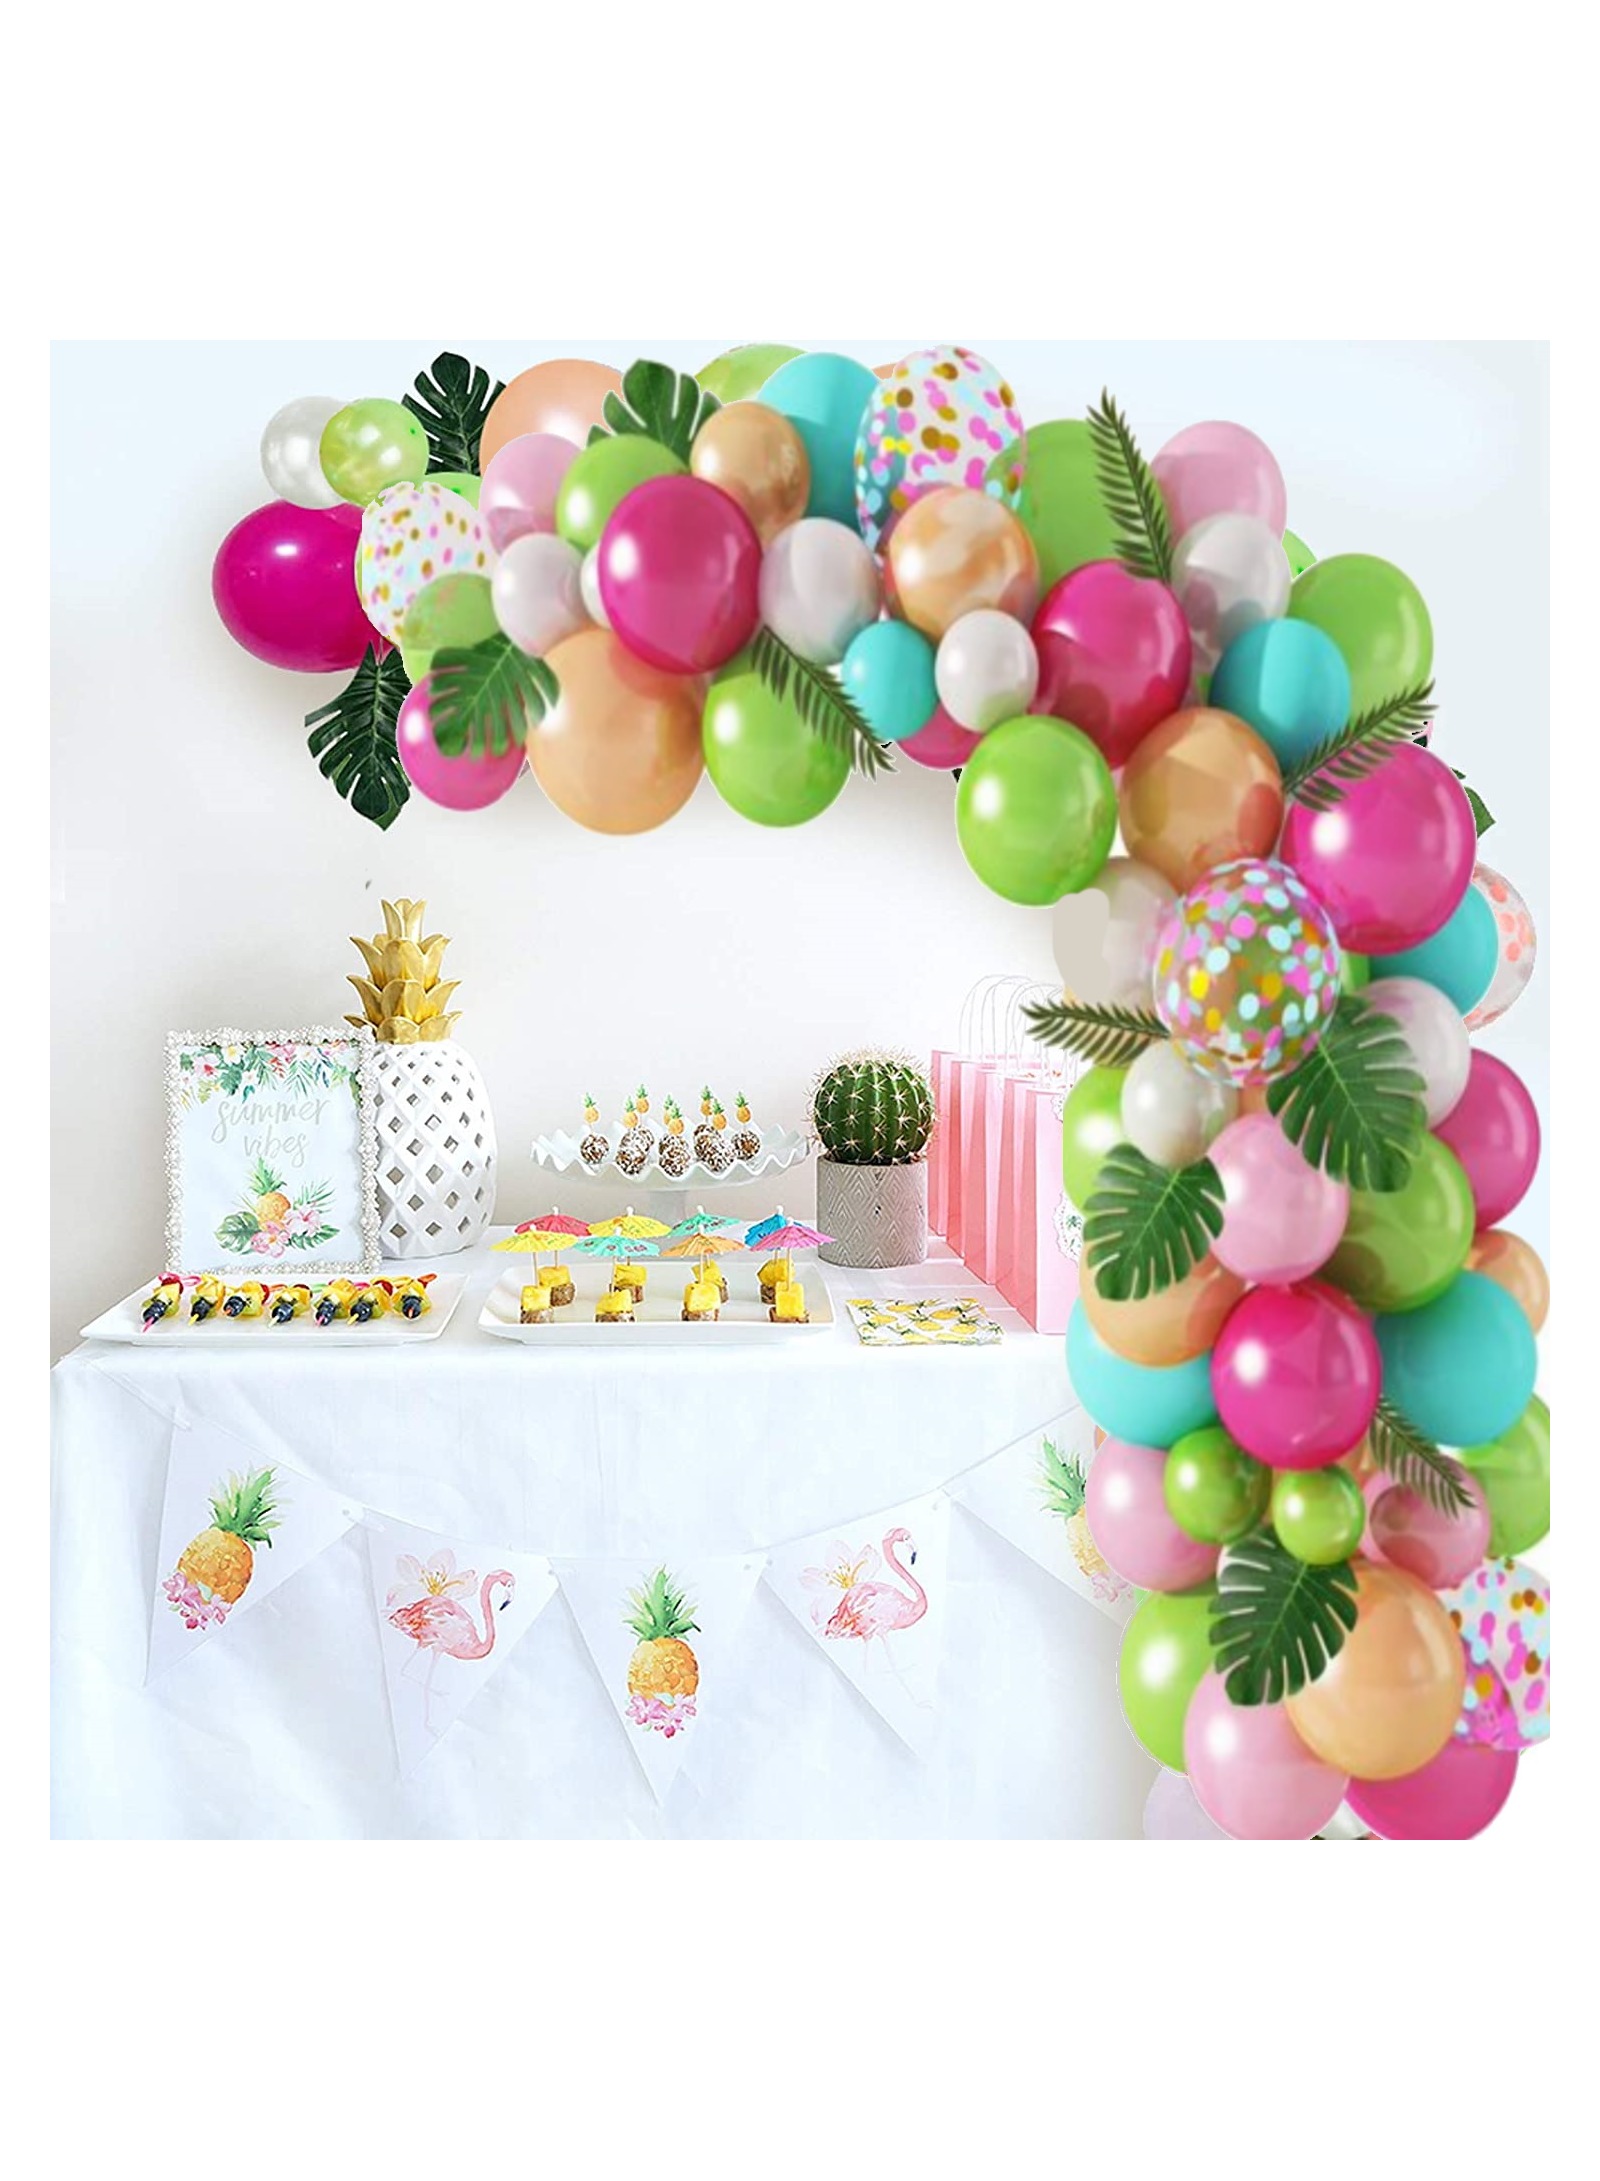 Tropical Arch Garland Kit, Green Hot Pink Confetti Latex Balloons Palm Leaves for Hawaii Flamingo Birthday Baby Shower Wedding Party Decorations Supplies (109pcs)